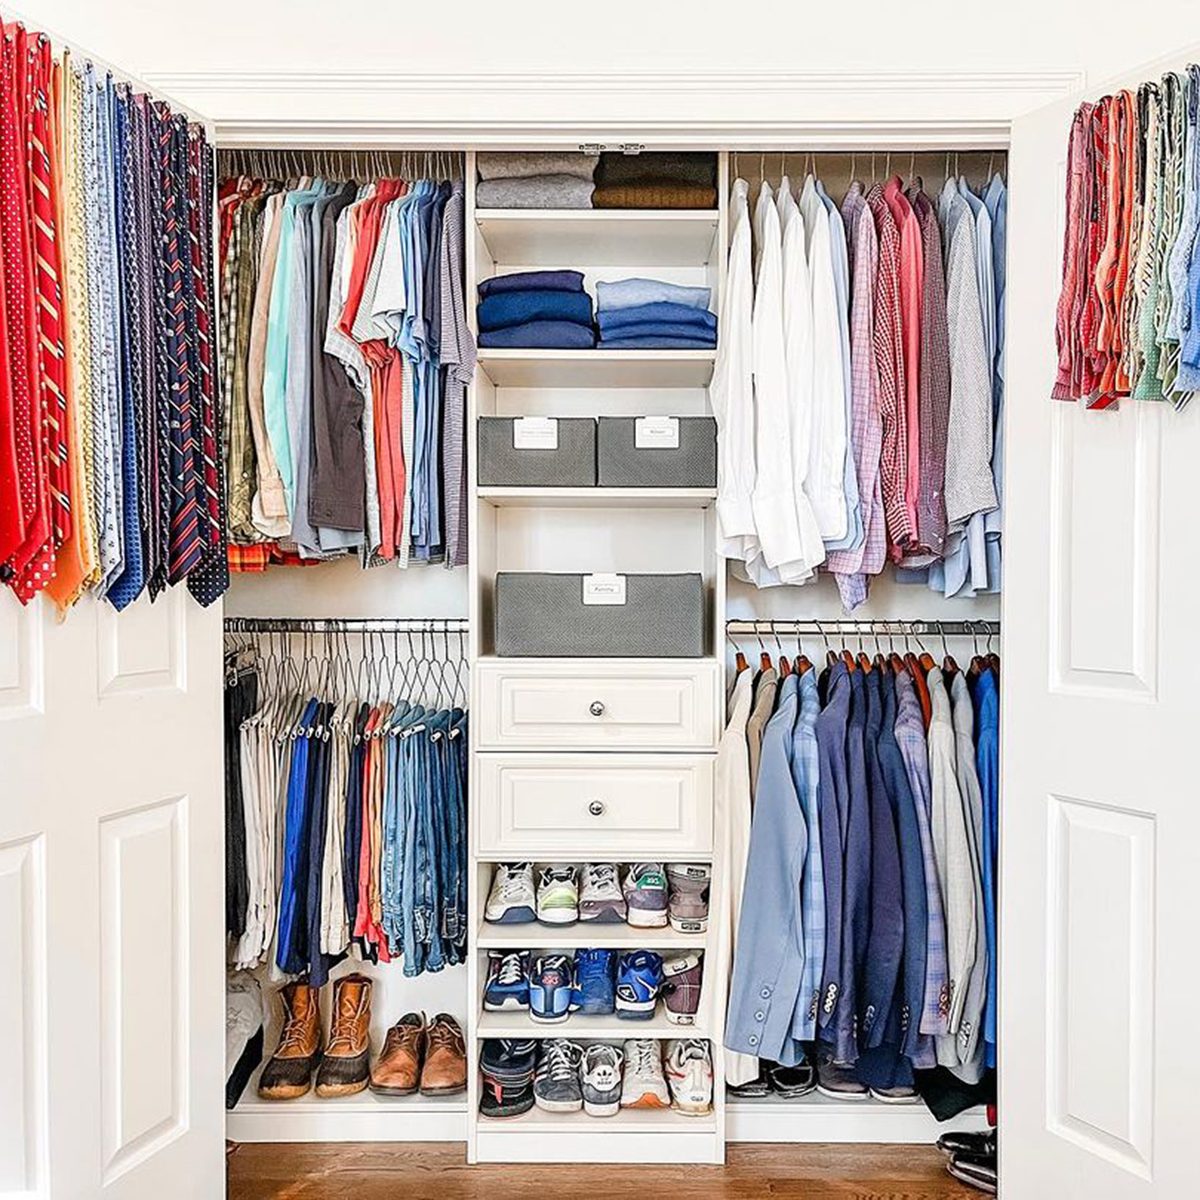 10 Bedroom Closet Ideas To Optimize Your Space Double Hanging Rods Courtesy @suddenlysimpleorganizing